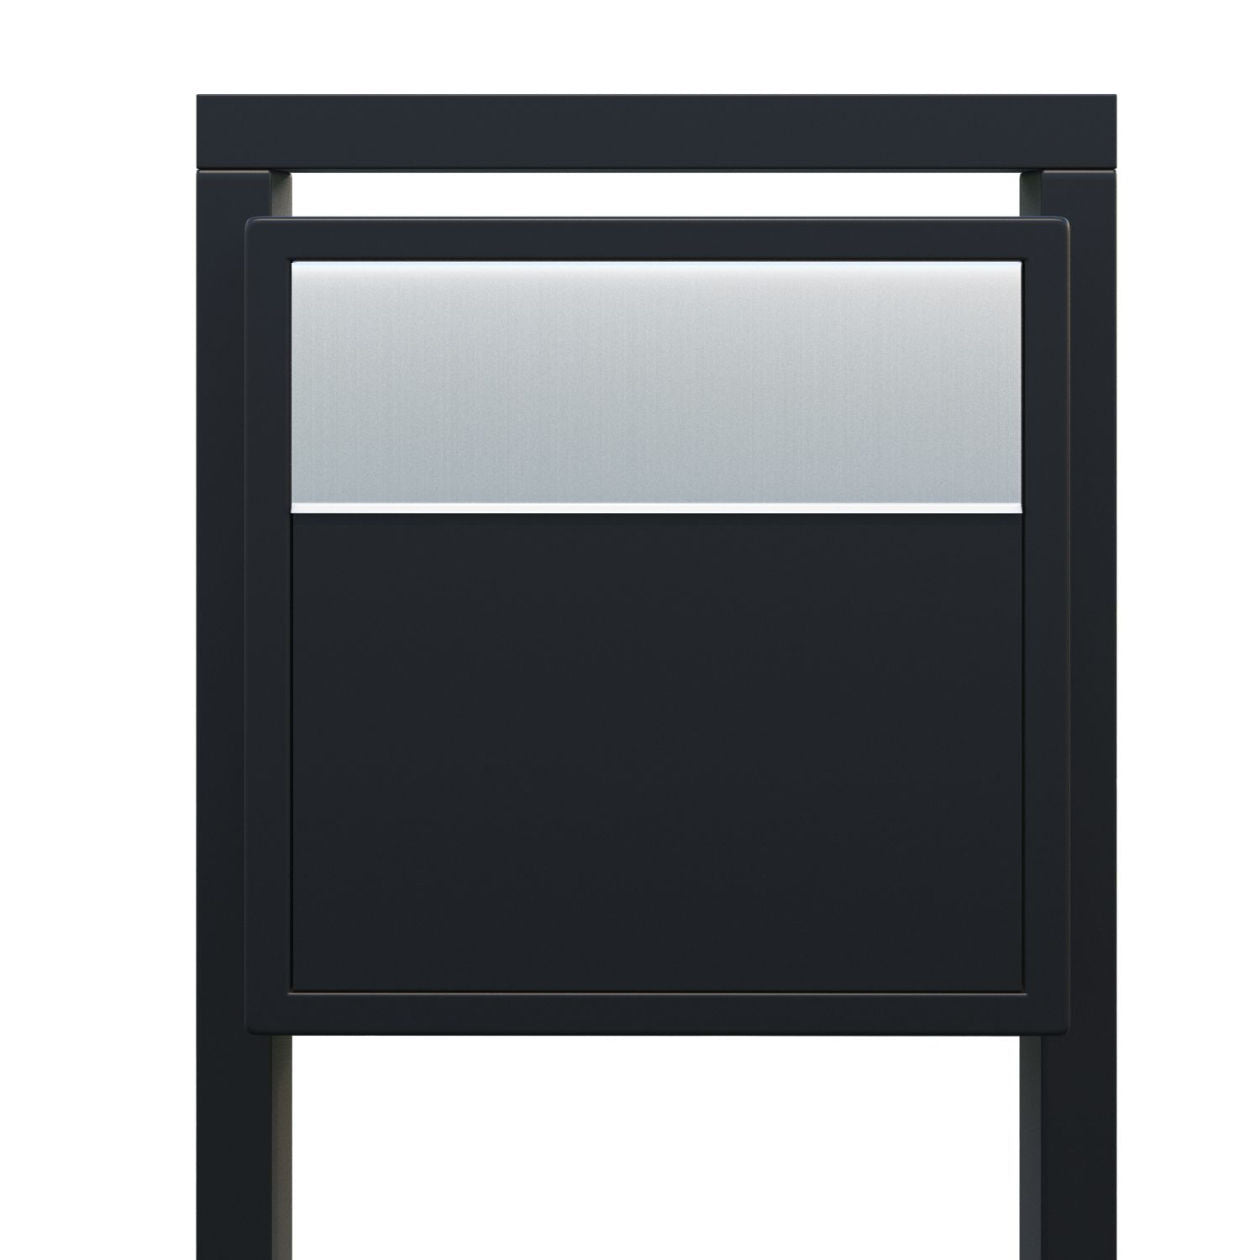 BURG 1 Standalone - Post-mounted locking mailbox in black with stainless steel flap